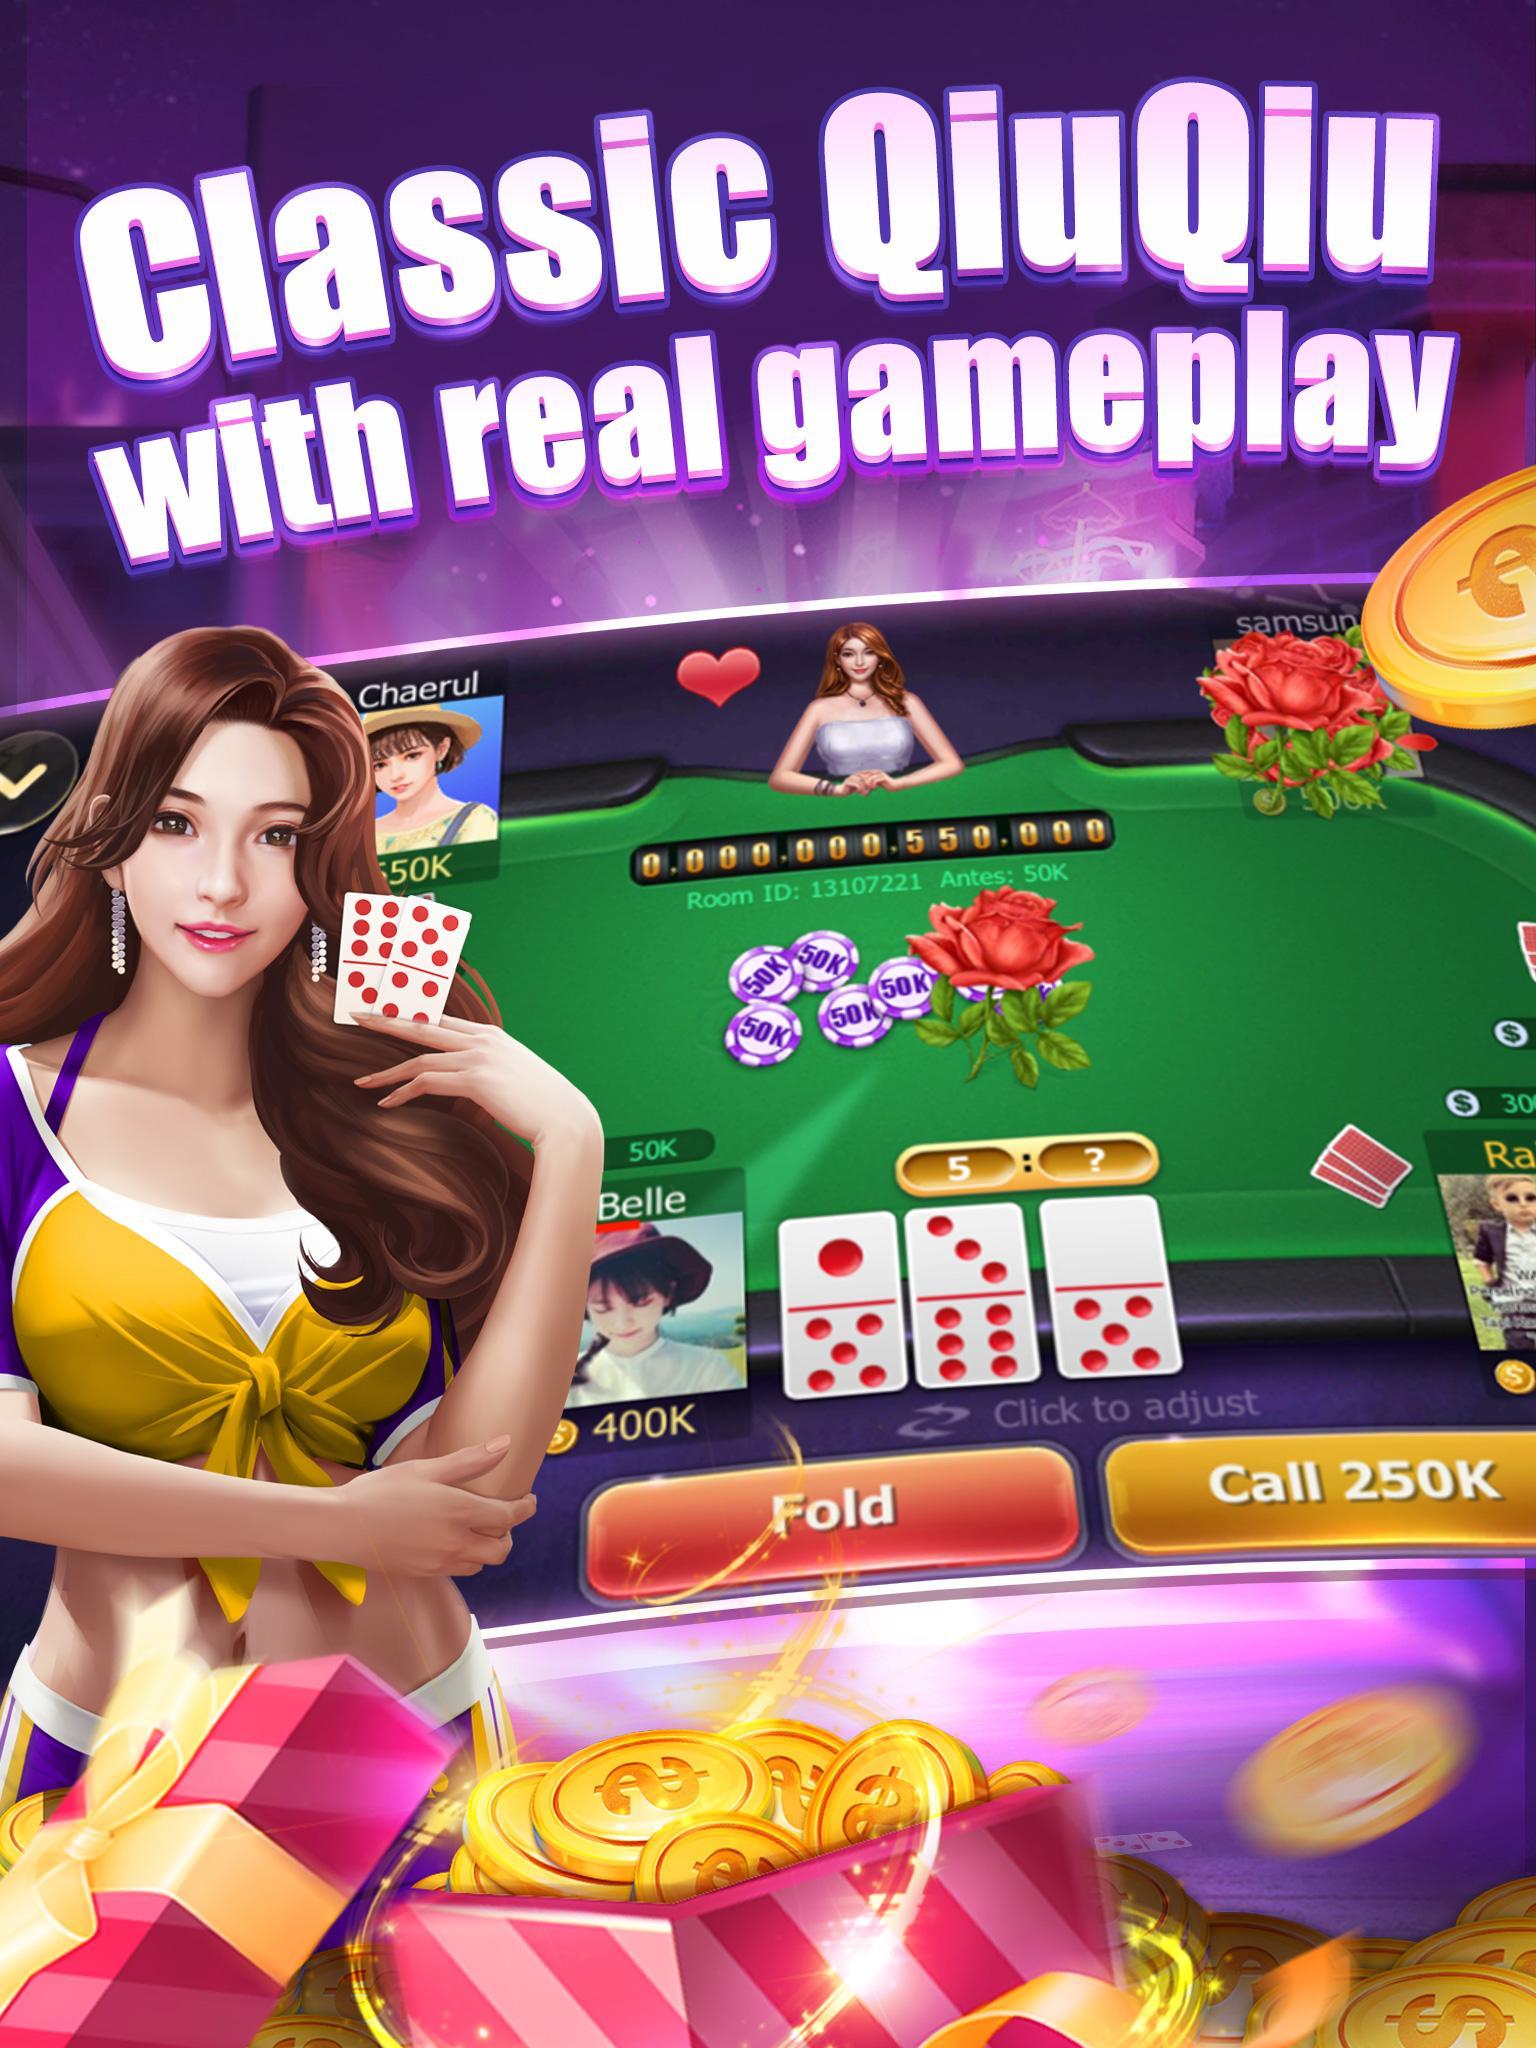 Read more about the article Download Game Domino Qiu Qiu Online Untuk Android, Gaple Capsa Susun: QiuQiu(99)/Texas Remi Online<div class="yasr-vv-stars-title-container"><div class='yasr-stars-title yasr-rater-stars'
                          id='yasr-visitor-votes-readonly-rater-fb6a6338a1e53'
                          data-rating='0'
                          data-rater-starsize='16'
                          data-rater-postid='2298'
                          data-rater-readonly='true'
                          data-readonly-attribute='true'
                      ></div><span class='yasr-stars-title-average'>0 (0)</span></div>